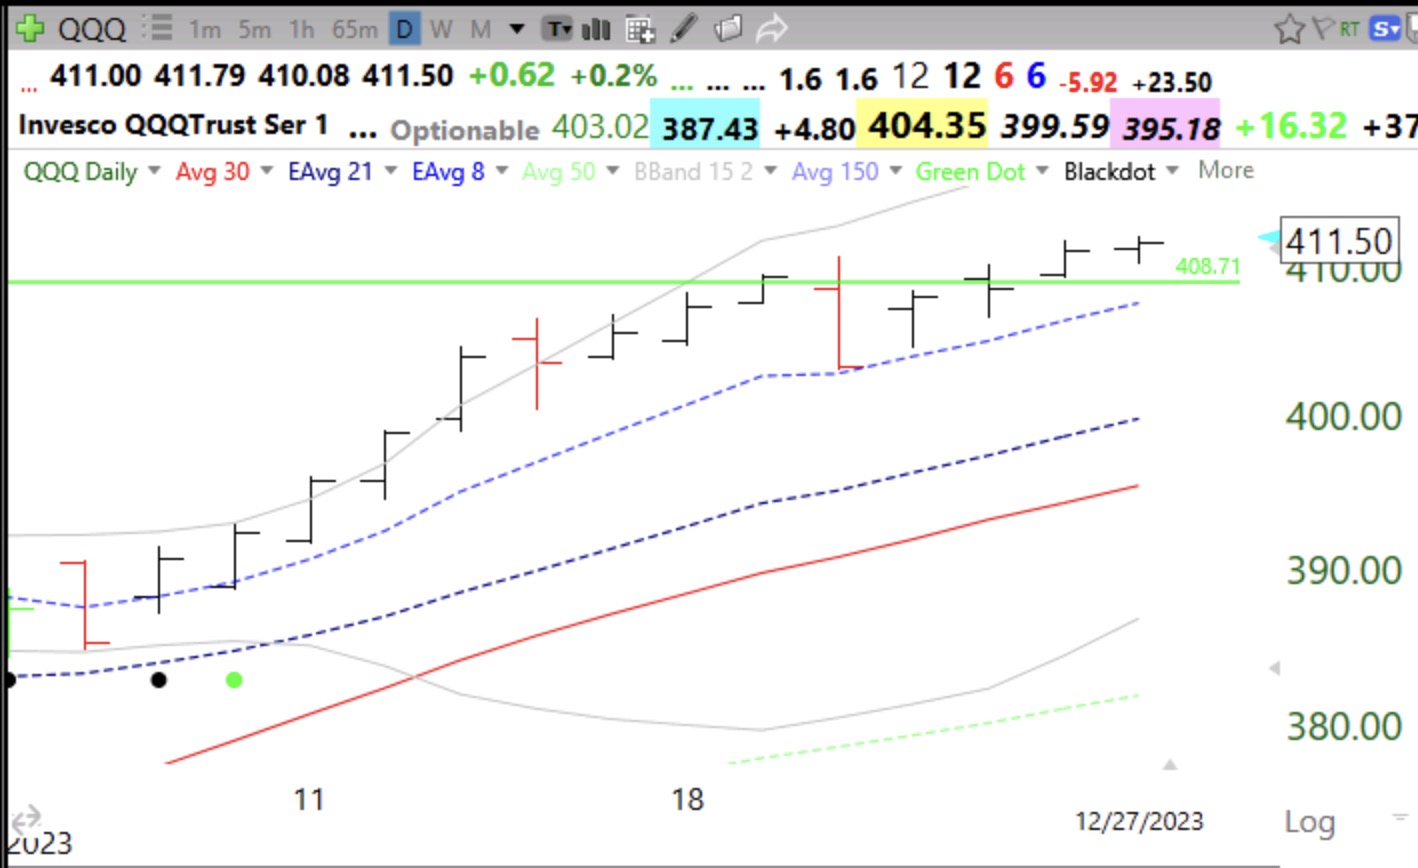 Blog Post: Day 37 of $QQQ short term up-trend; 350 US new highs